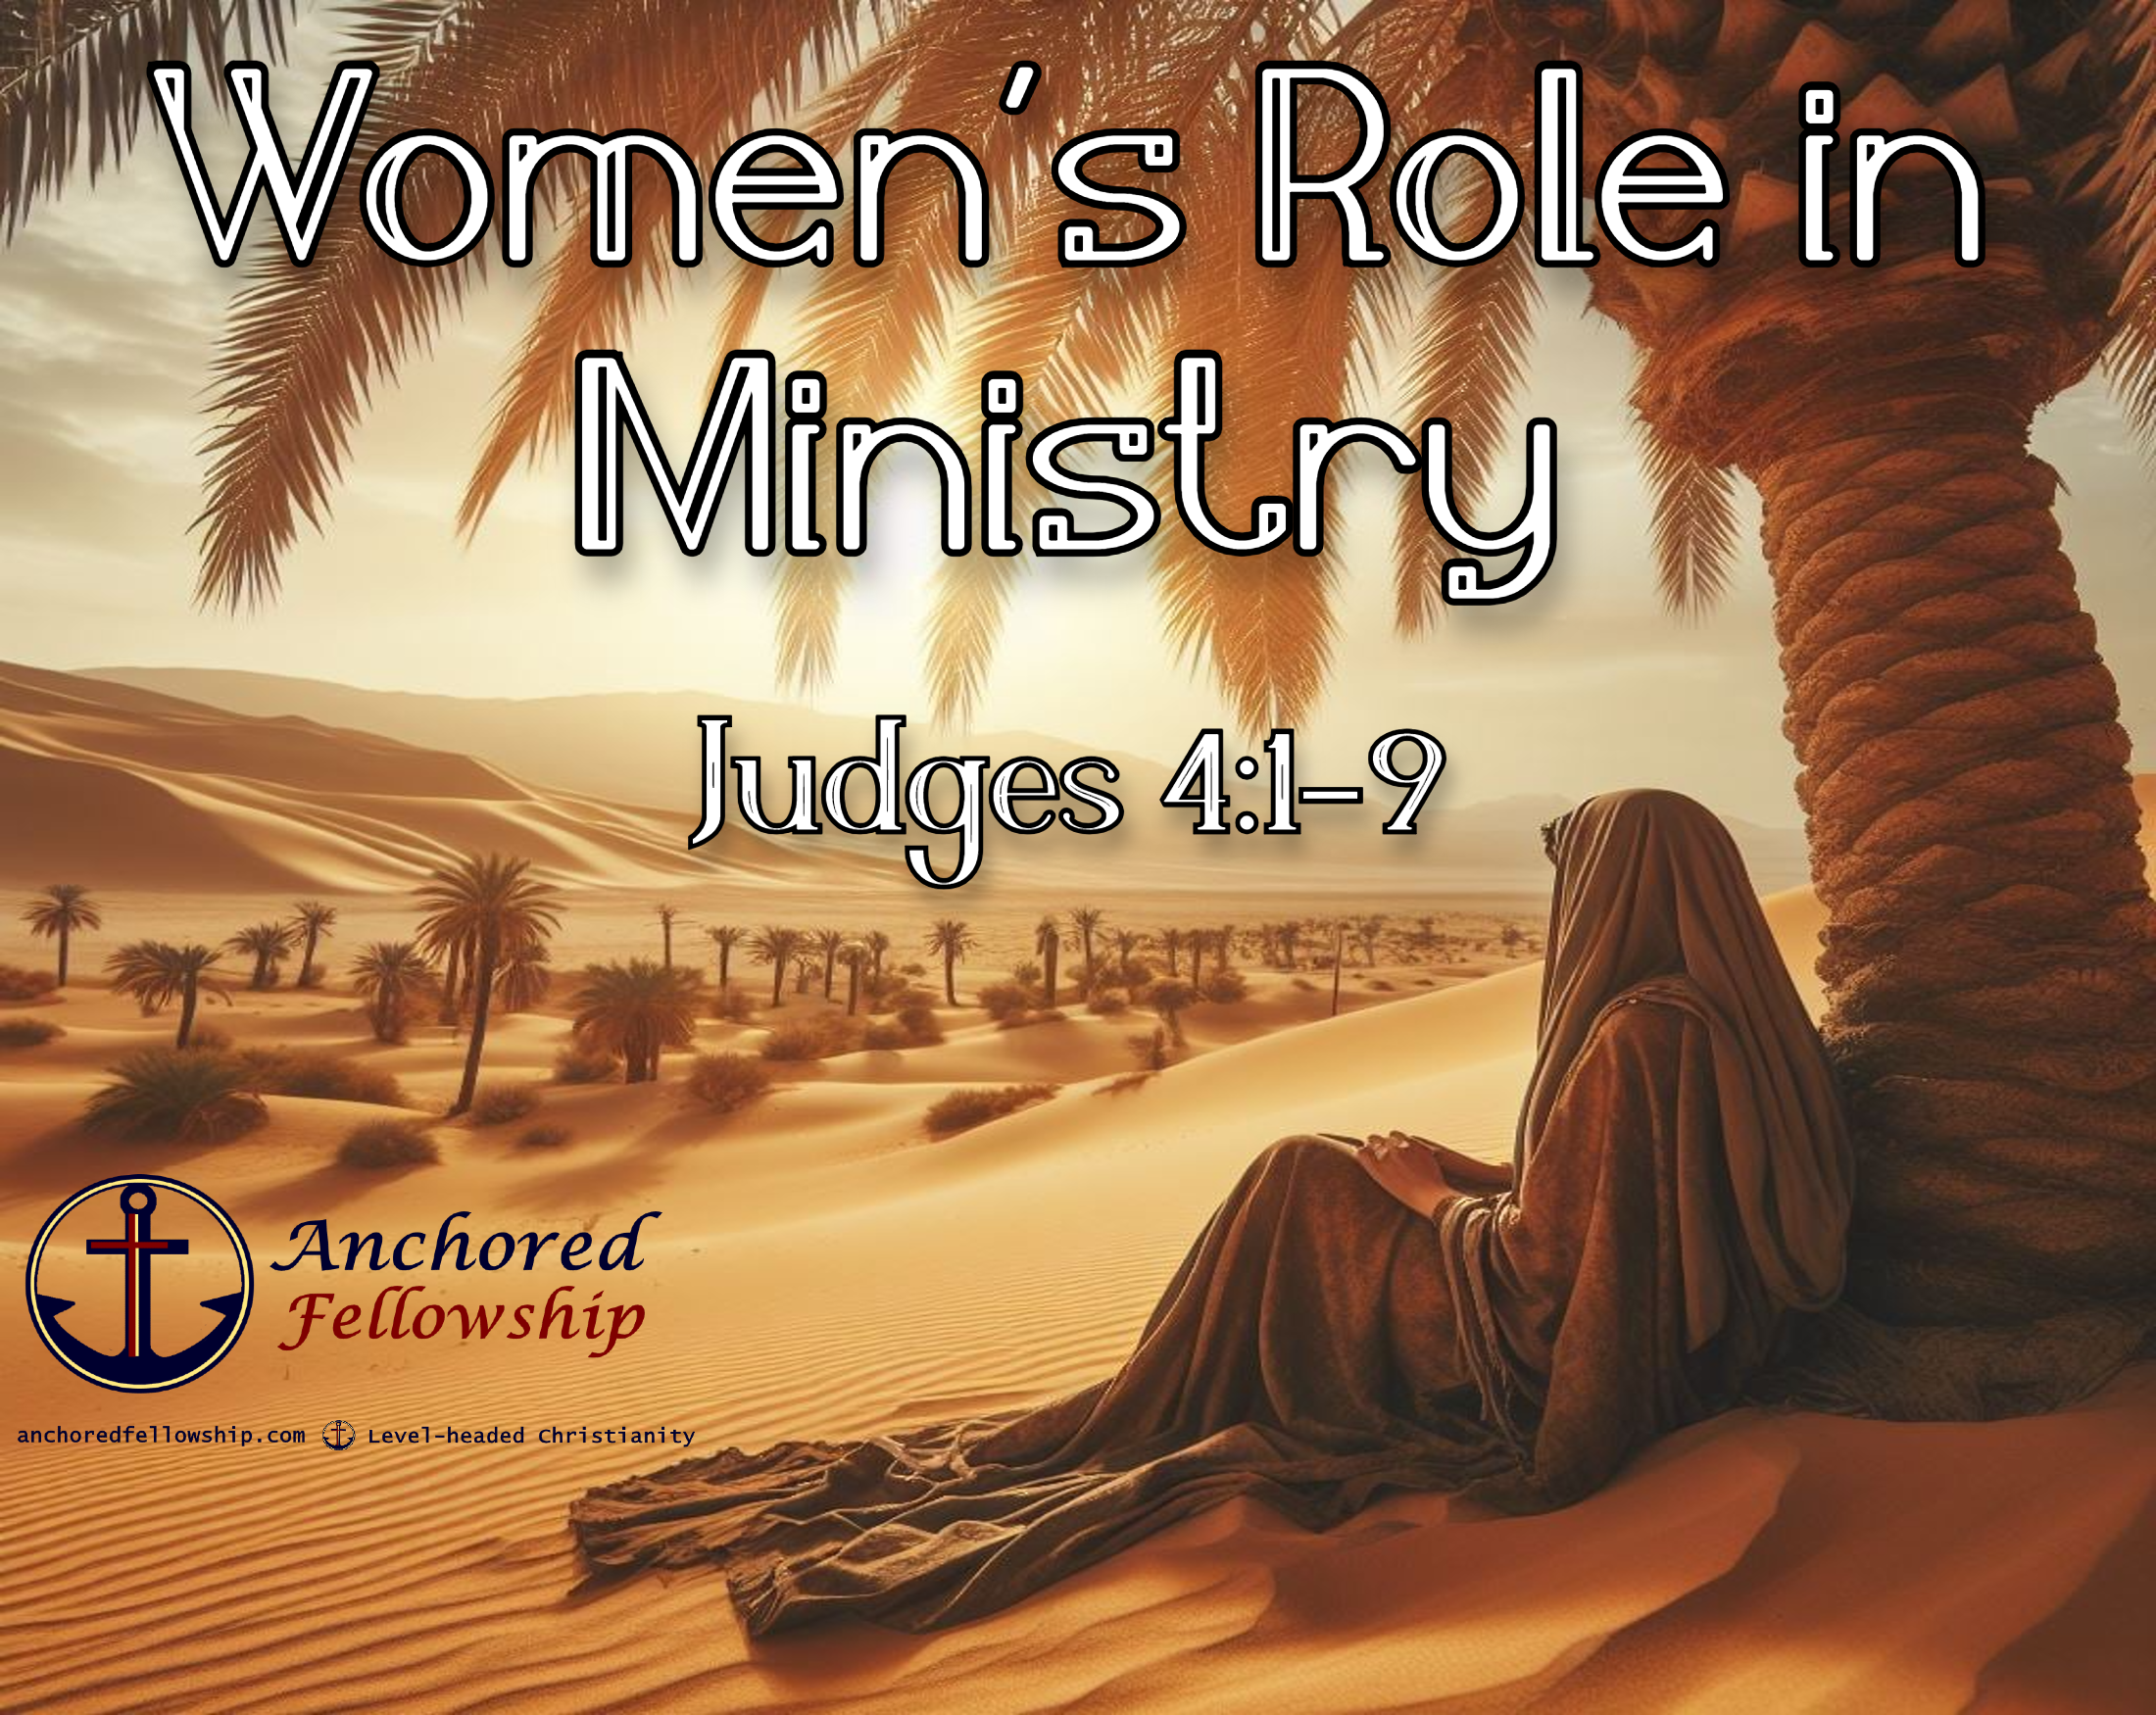 Women's Role in Ministry Image